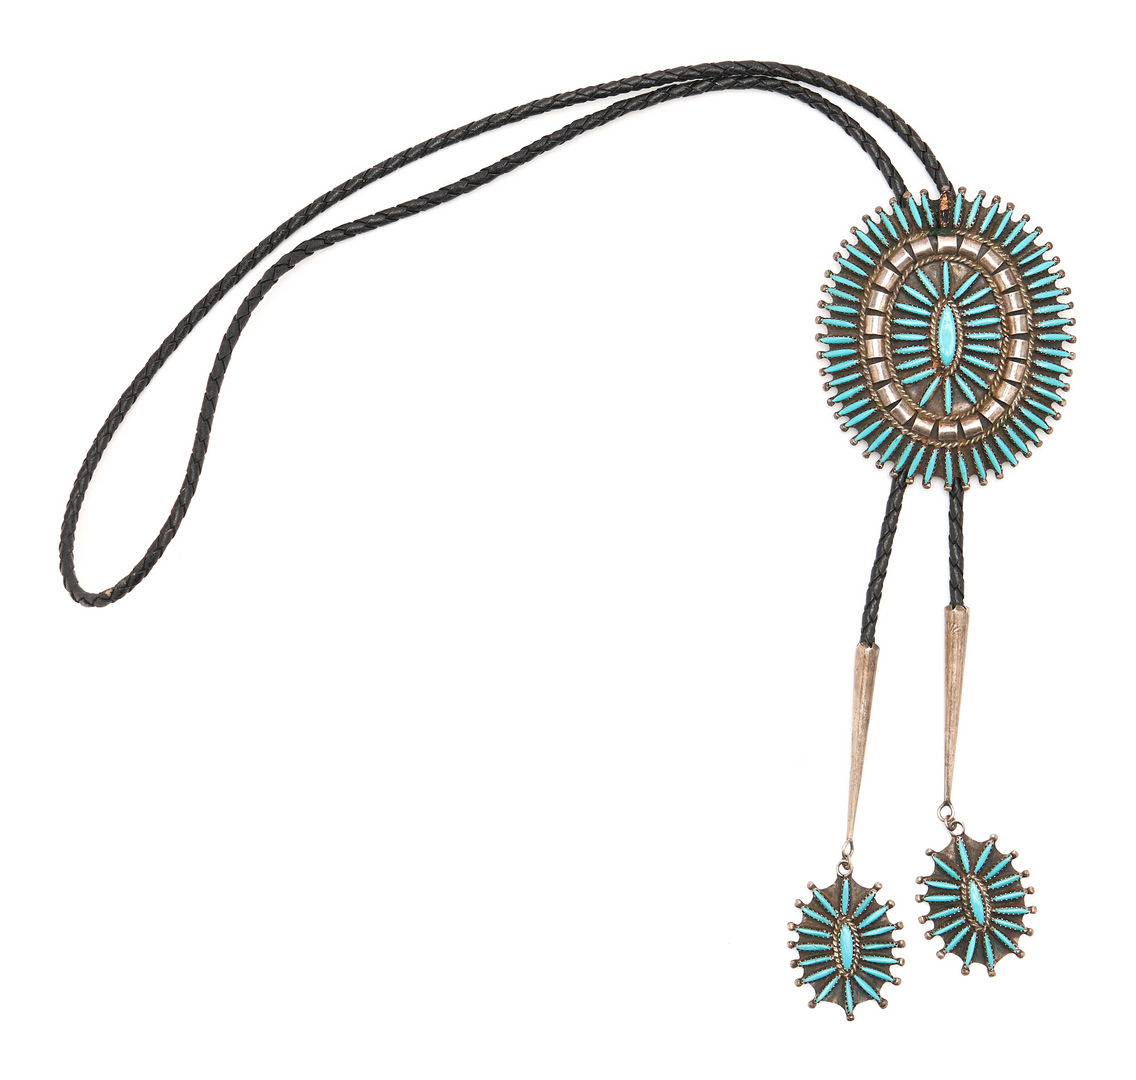 Lot 1093: 4 Native American Turquoise & Silver Jewelry Items, incl. Bolo Tie